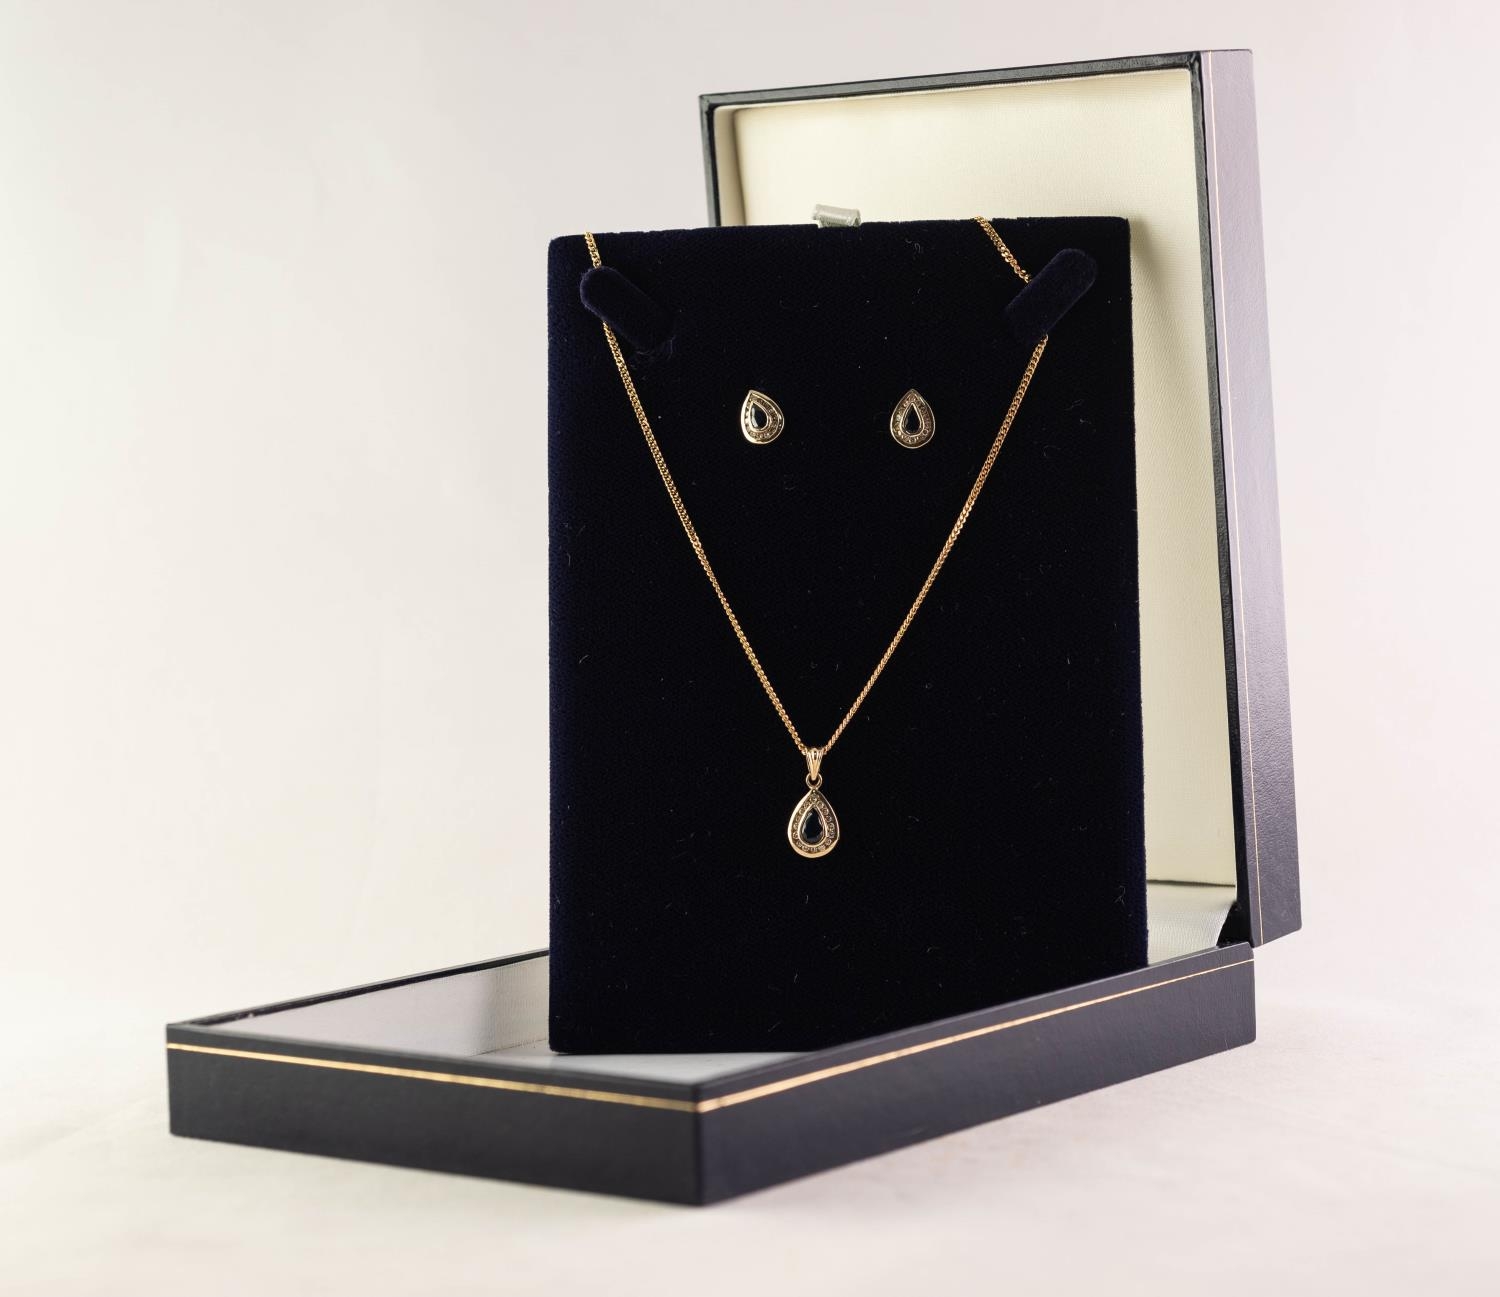 9ct GOLD CHAIN NECKLACE, 18in (46cm) long and the 9ct GOLD SMALL TEAR SHAPED PENDANT with a tear